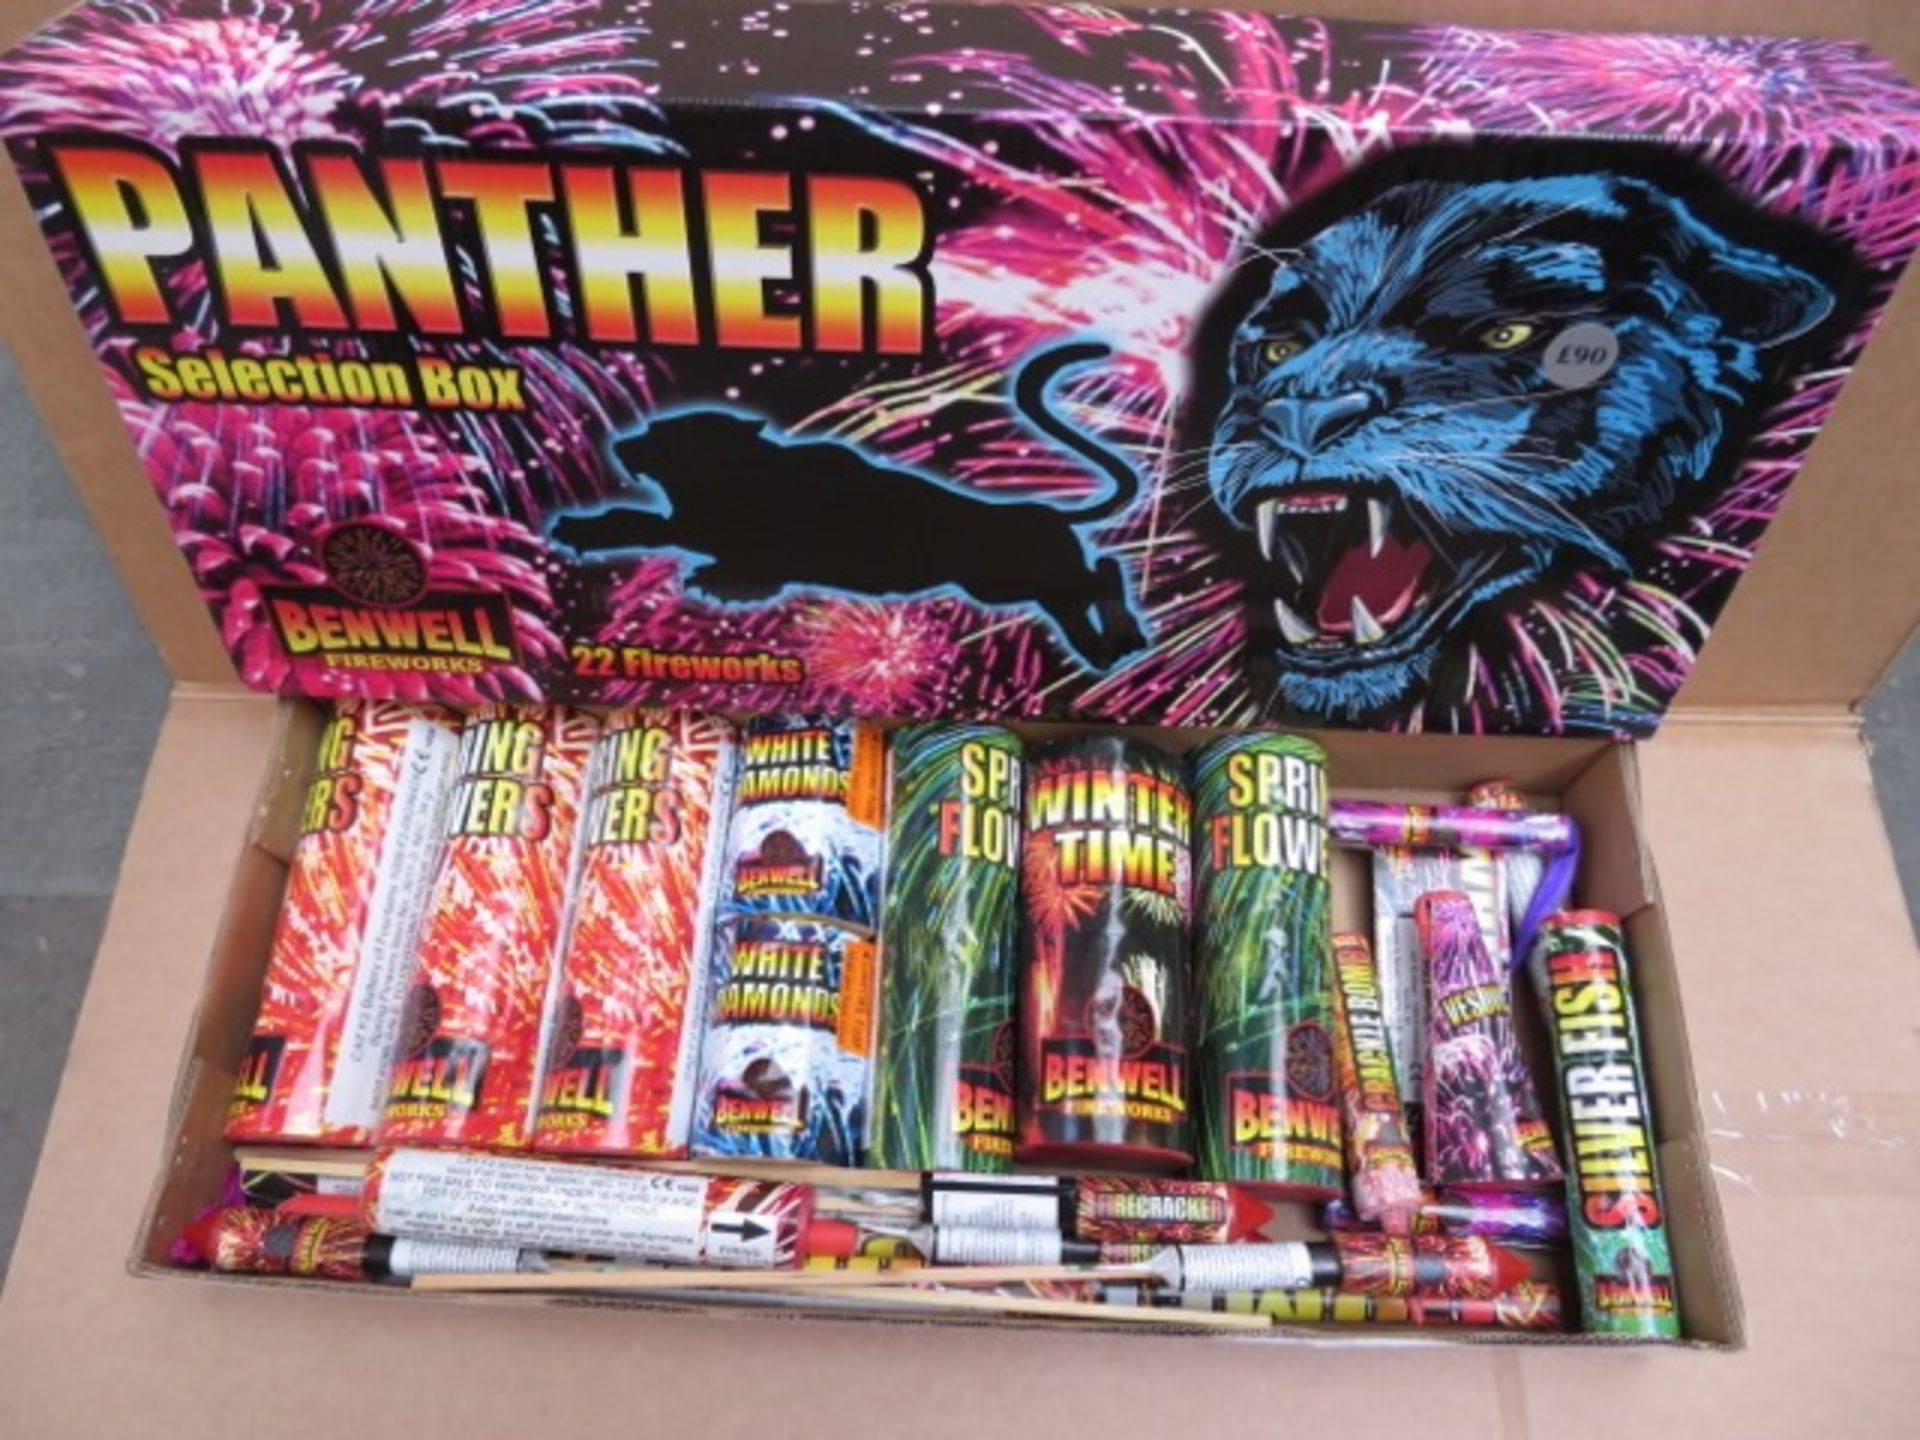 1 x Panther 22 Piece Selection Box. Pricemarked at £90. Huge selection of great quality fireworks to